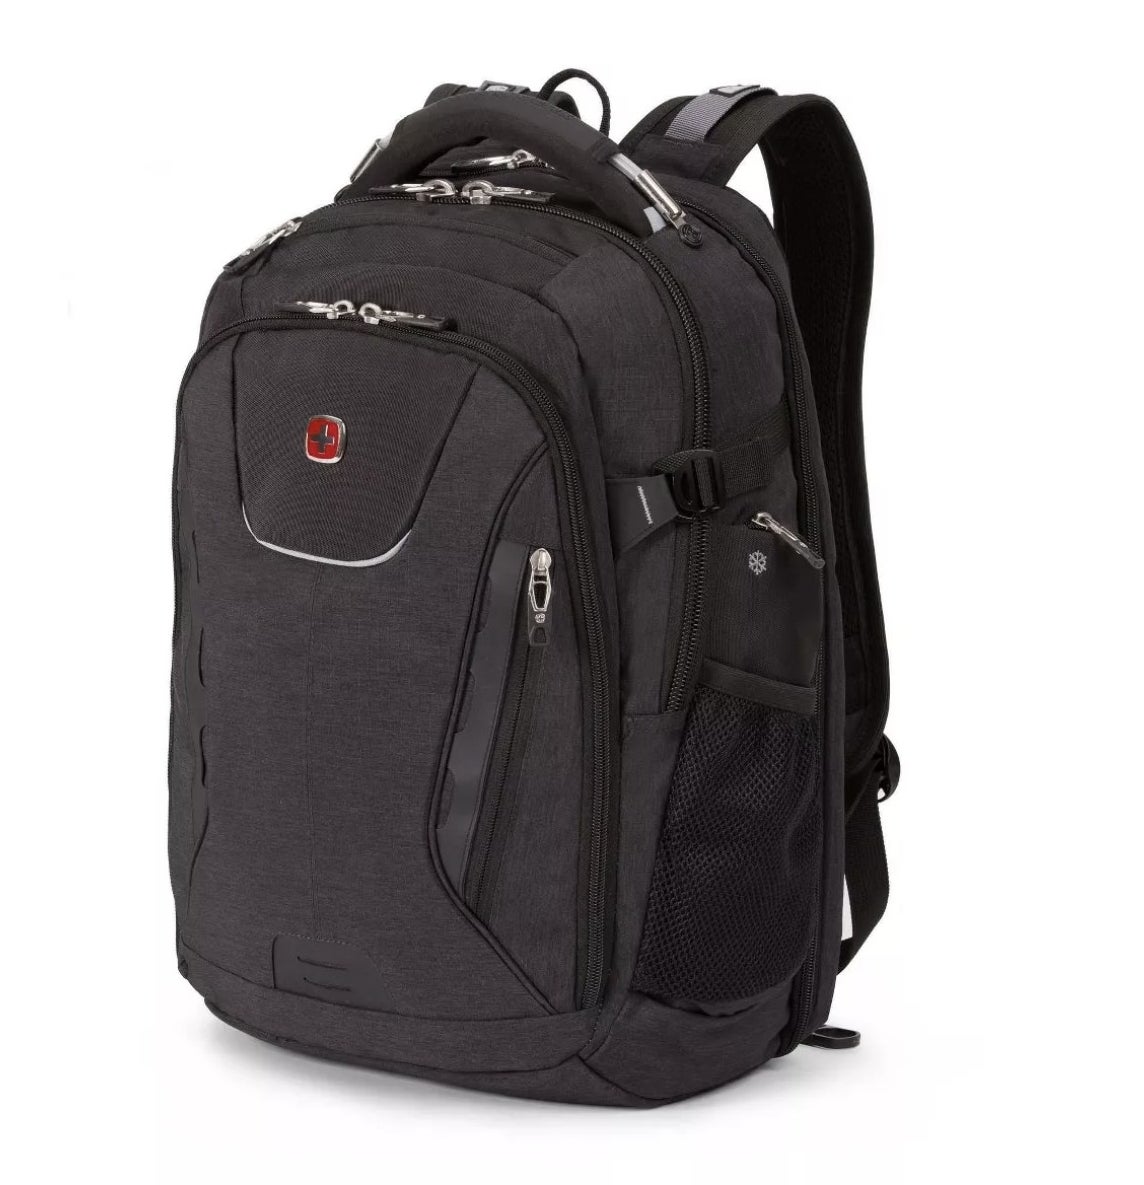 The backpack in the color charcoal